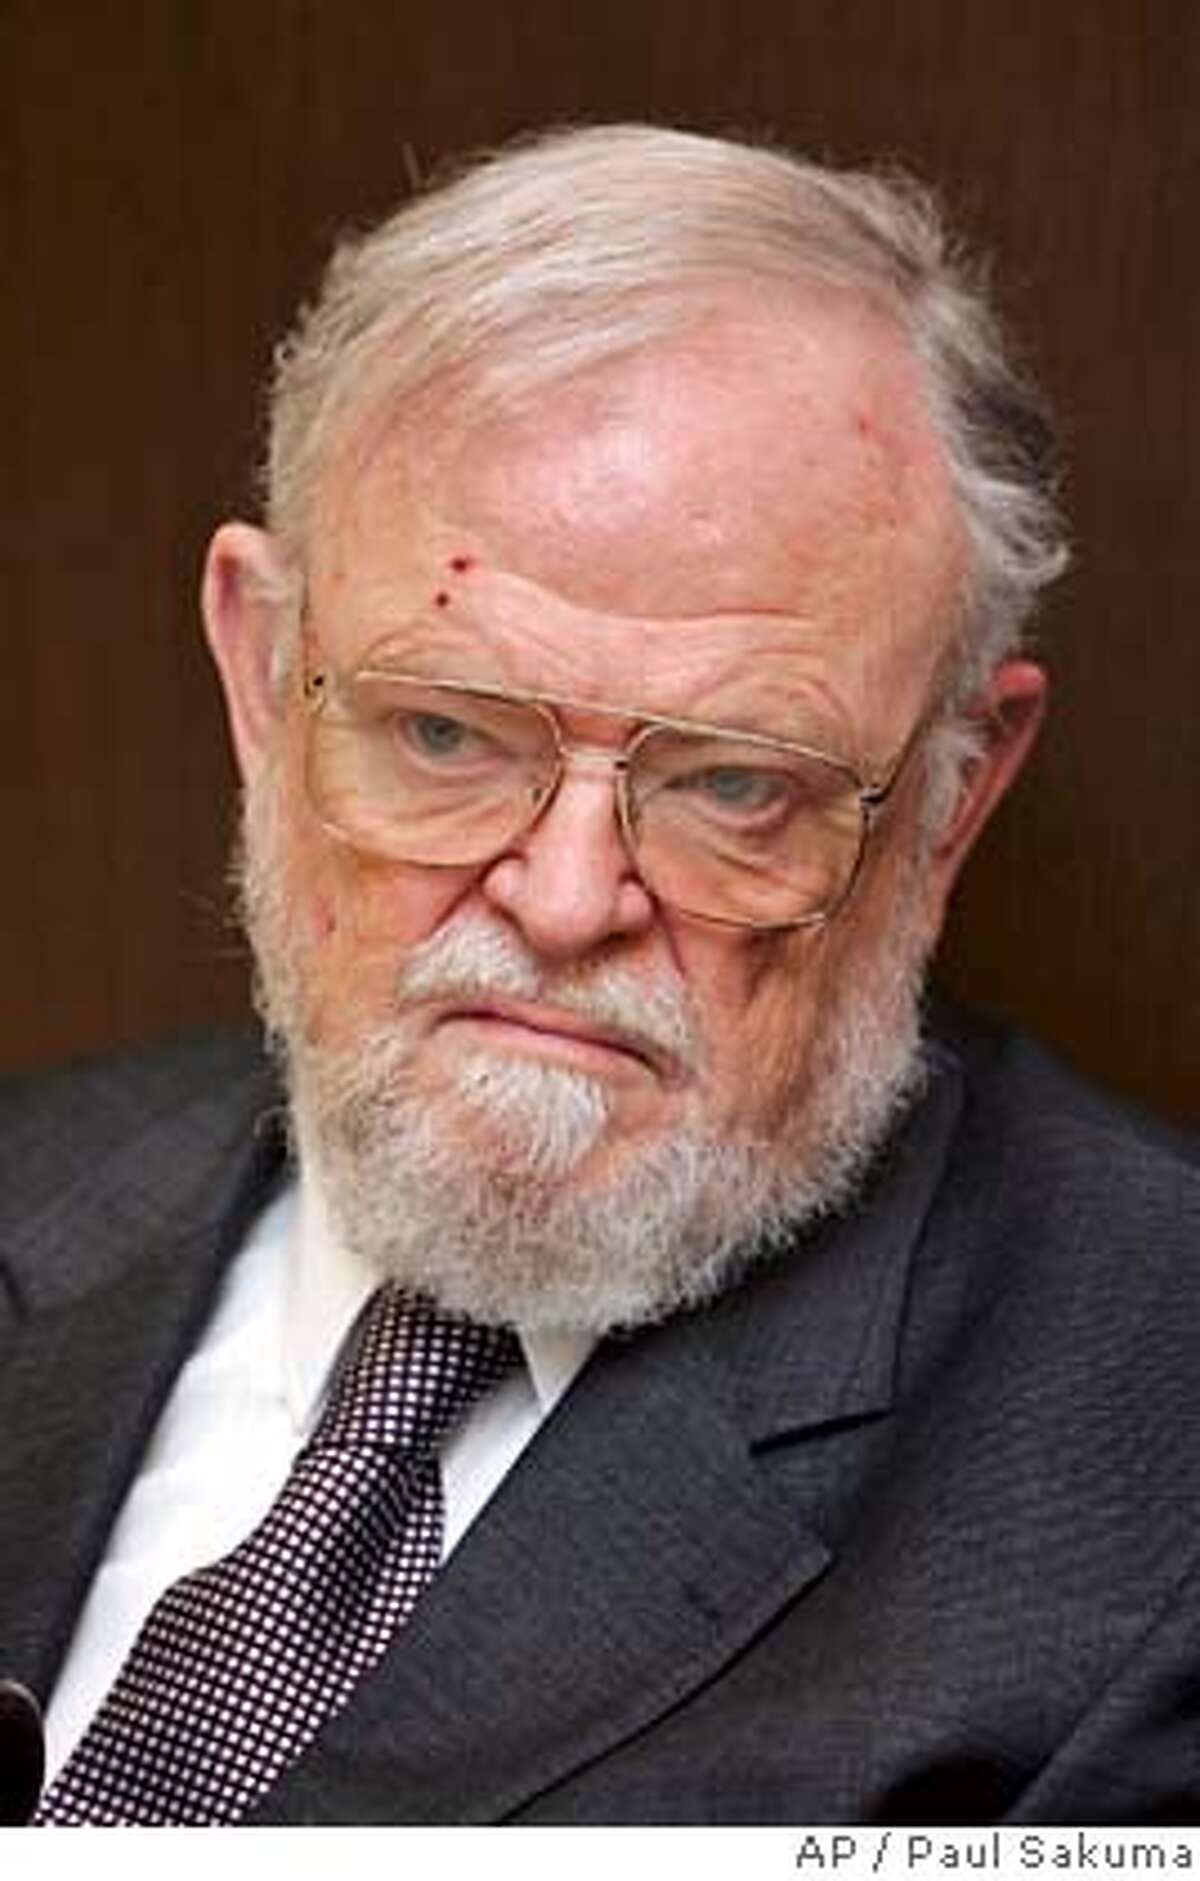 William Ayres, a noted child psychiatrist, waits outside a San Mateo County Superior Court in Redwood City, Calif., Friday, April 27, 2007, before pleading not guilty to charges he molested seven boys in his care. Ayres, 75, appeared briefly as a prosecutor added three additional counts to the indictment involving two new alleged victims. Ayres now faces 21 counts of lewd and lascivious behavior. Five of the boys were between 9 and 12 when the alleged abuse took place. (AP Photo/Paul Sakuma) Ran on: 04-28-2007 Dr. William Ayres faces accusations of molesting two more of his former patients. Ran on: 04-28-2007 Dr. William Ayres faces accusations of molesting two more of his former patients.